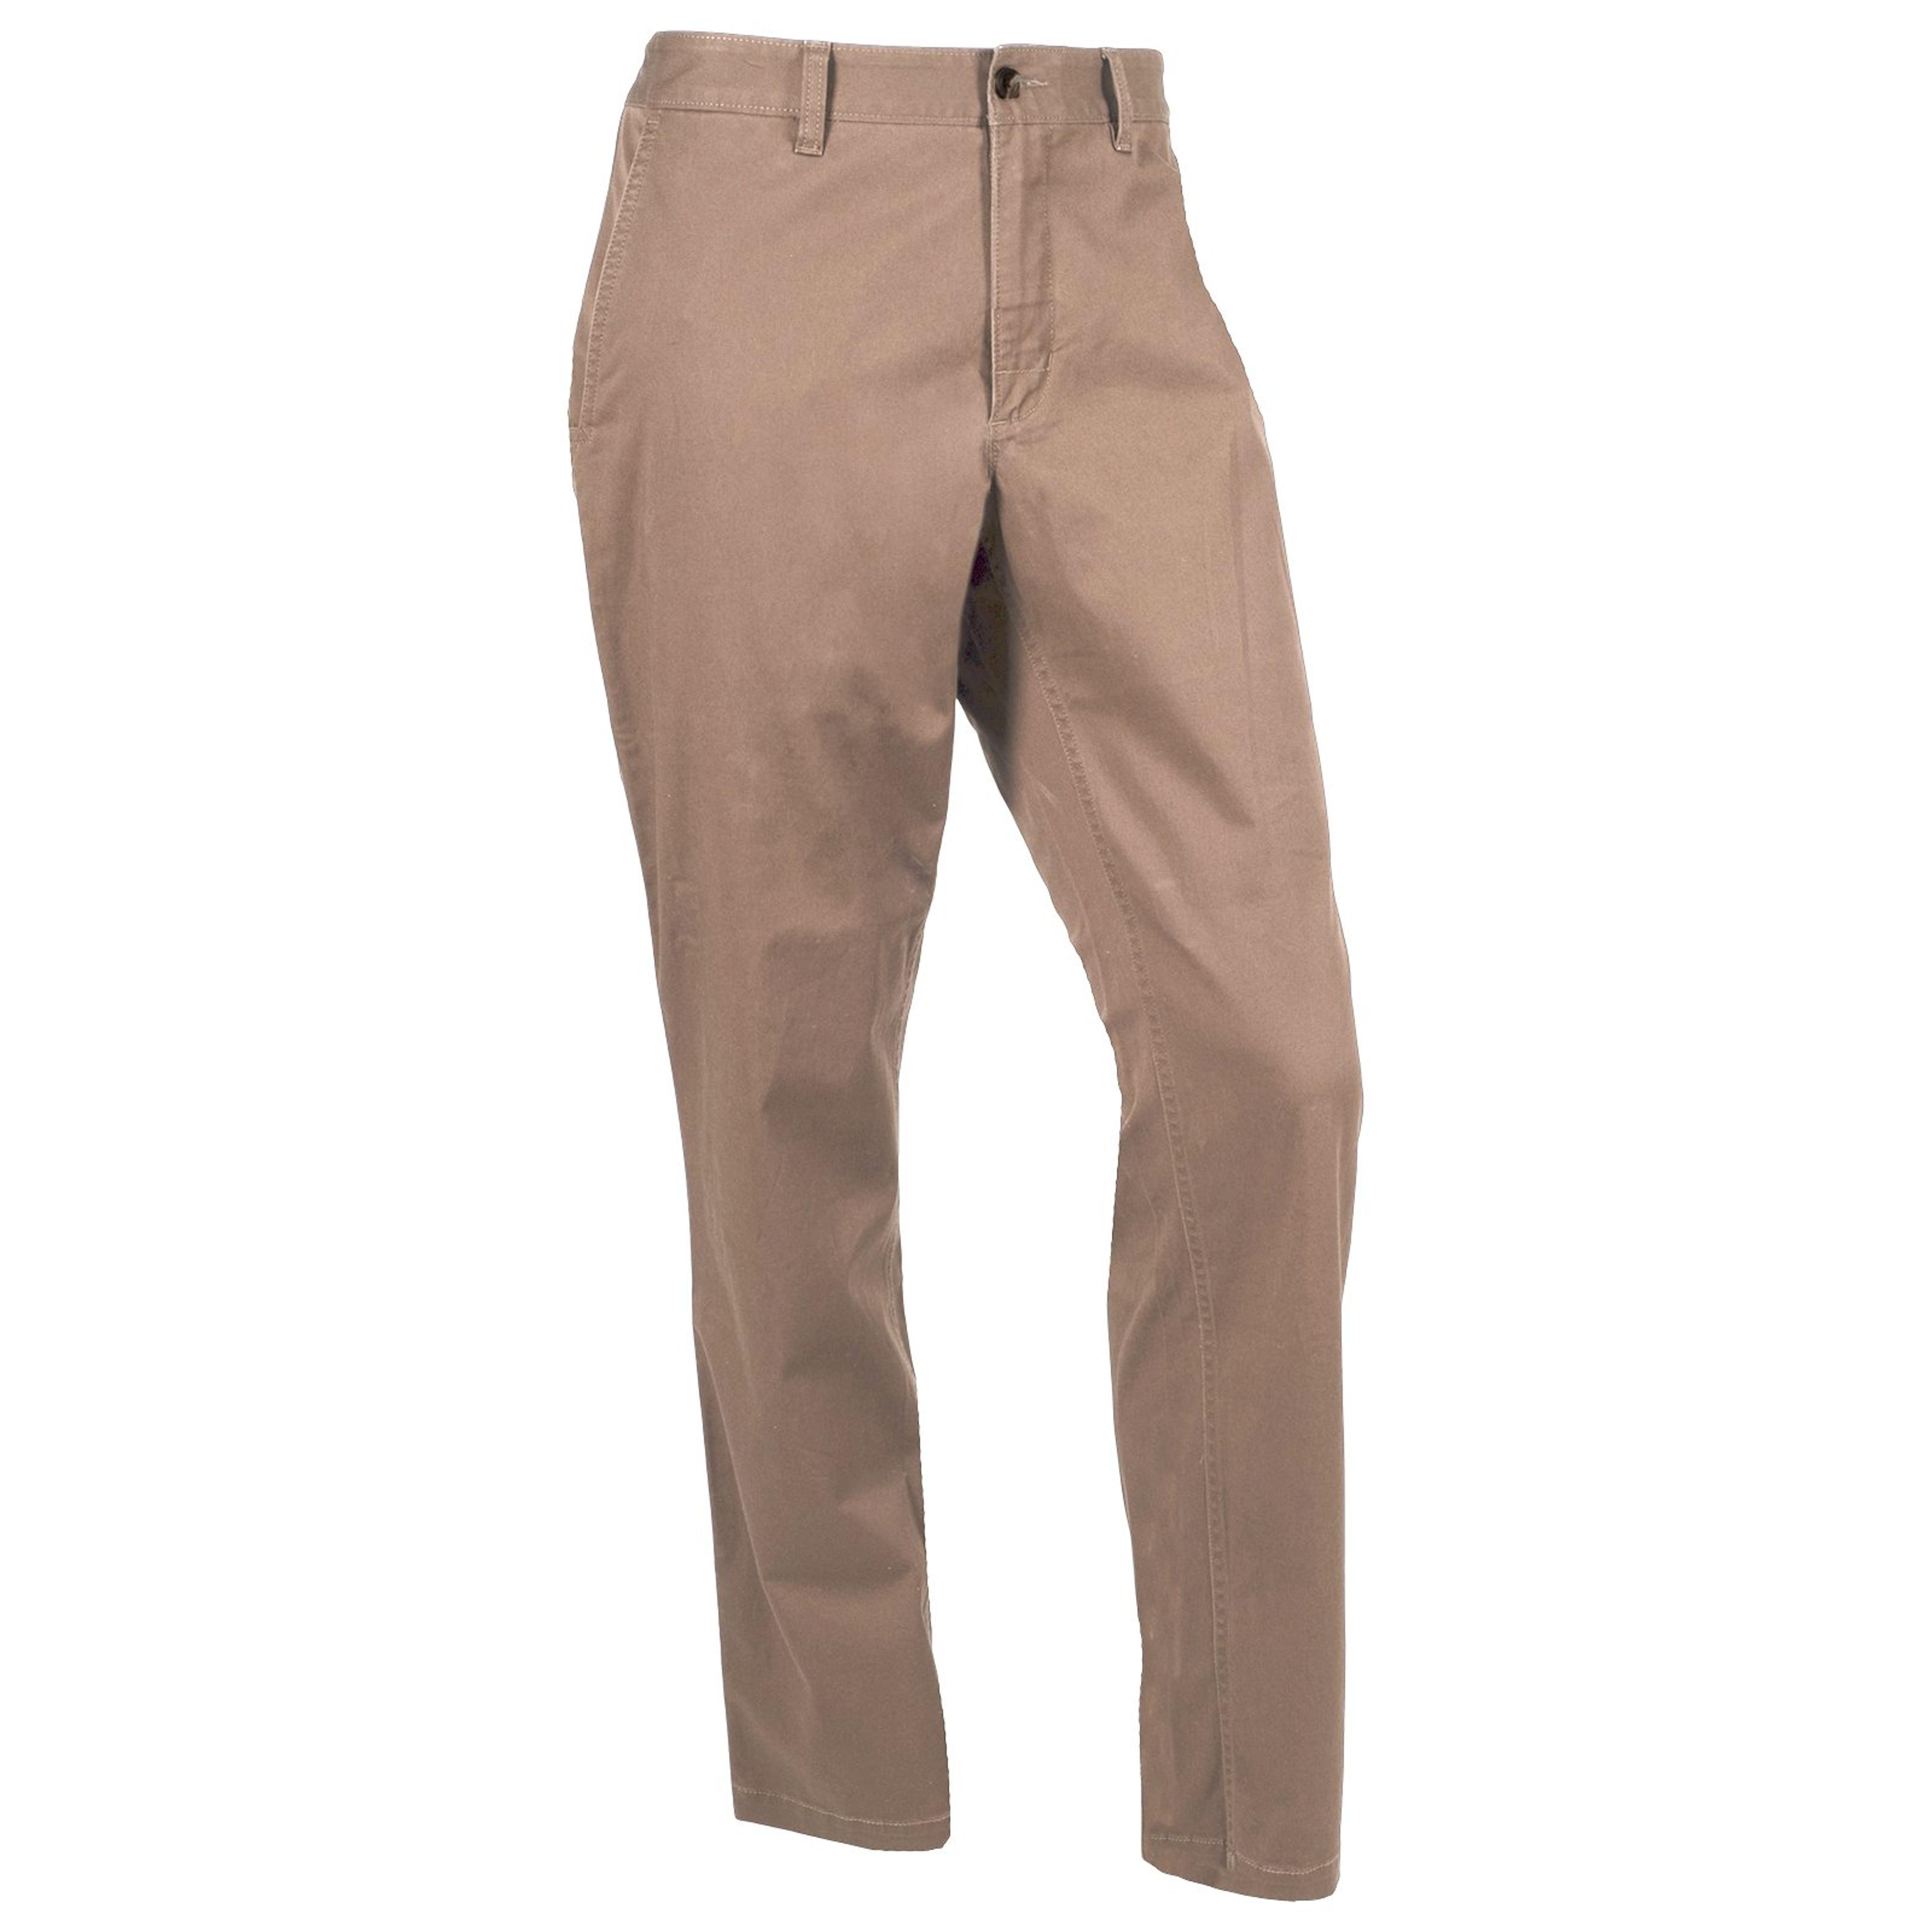  Homestead Chino Modern Fit